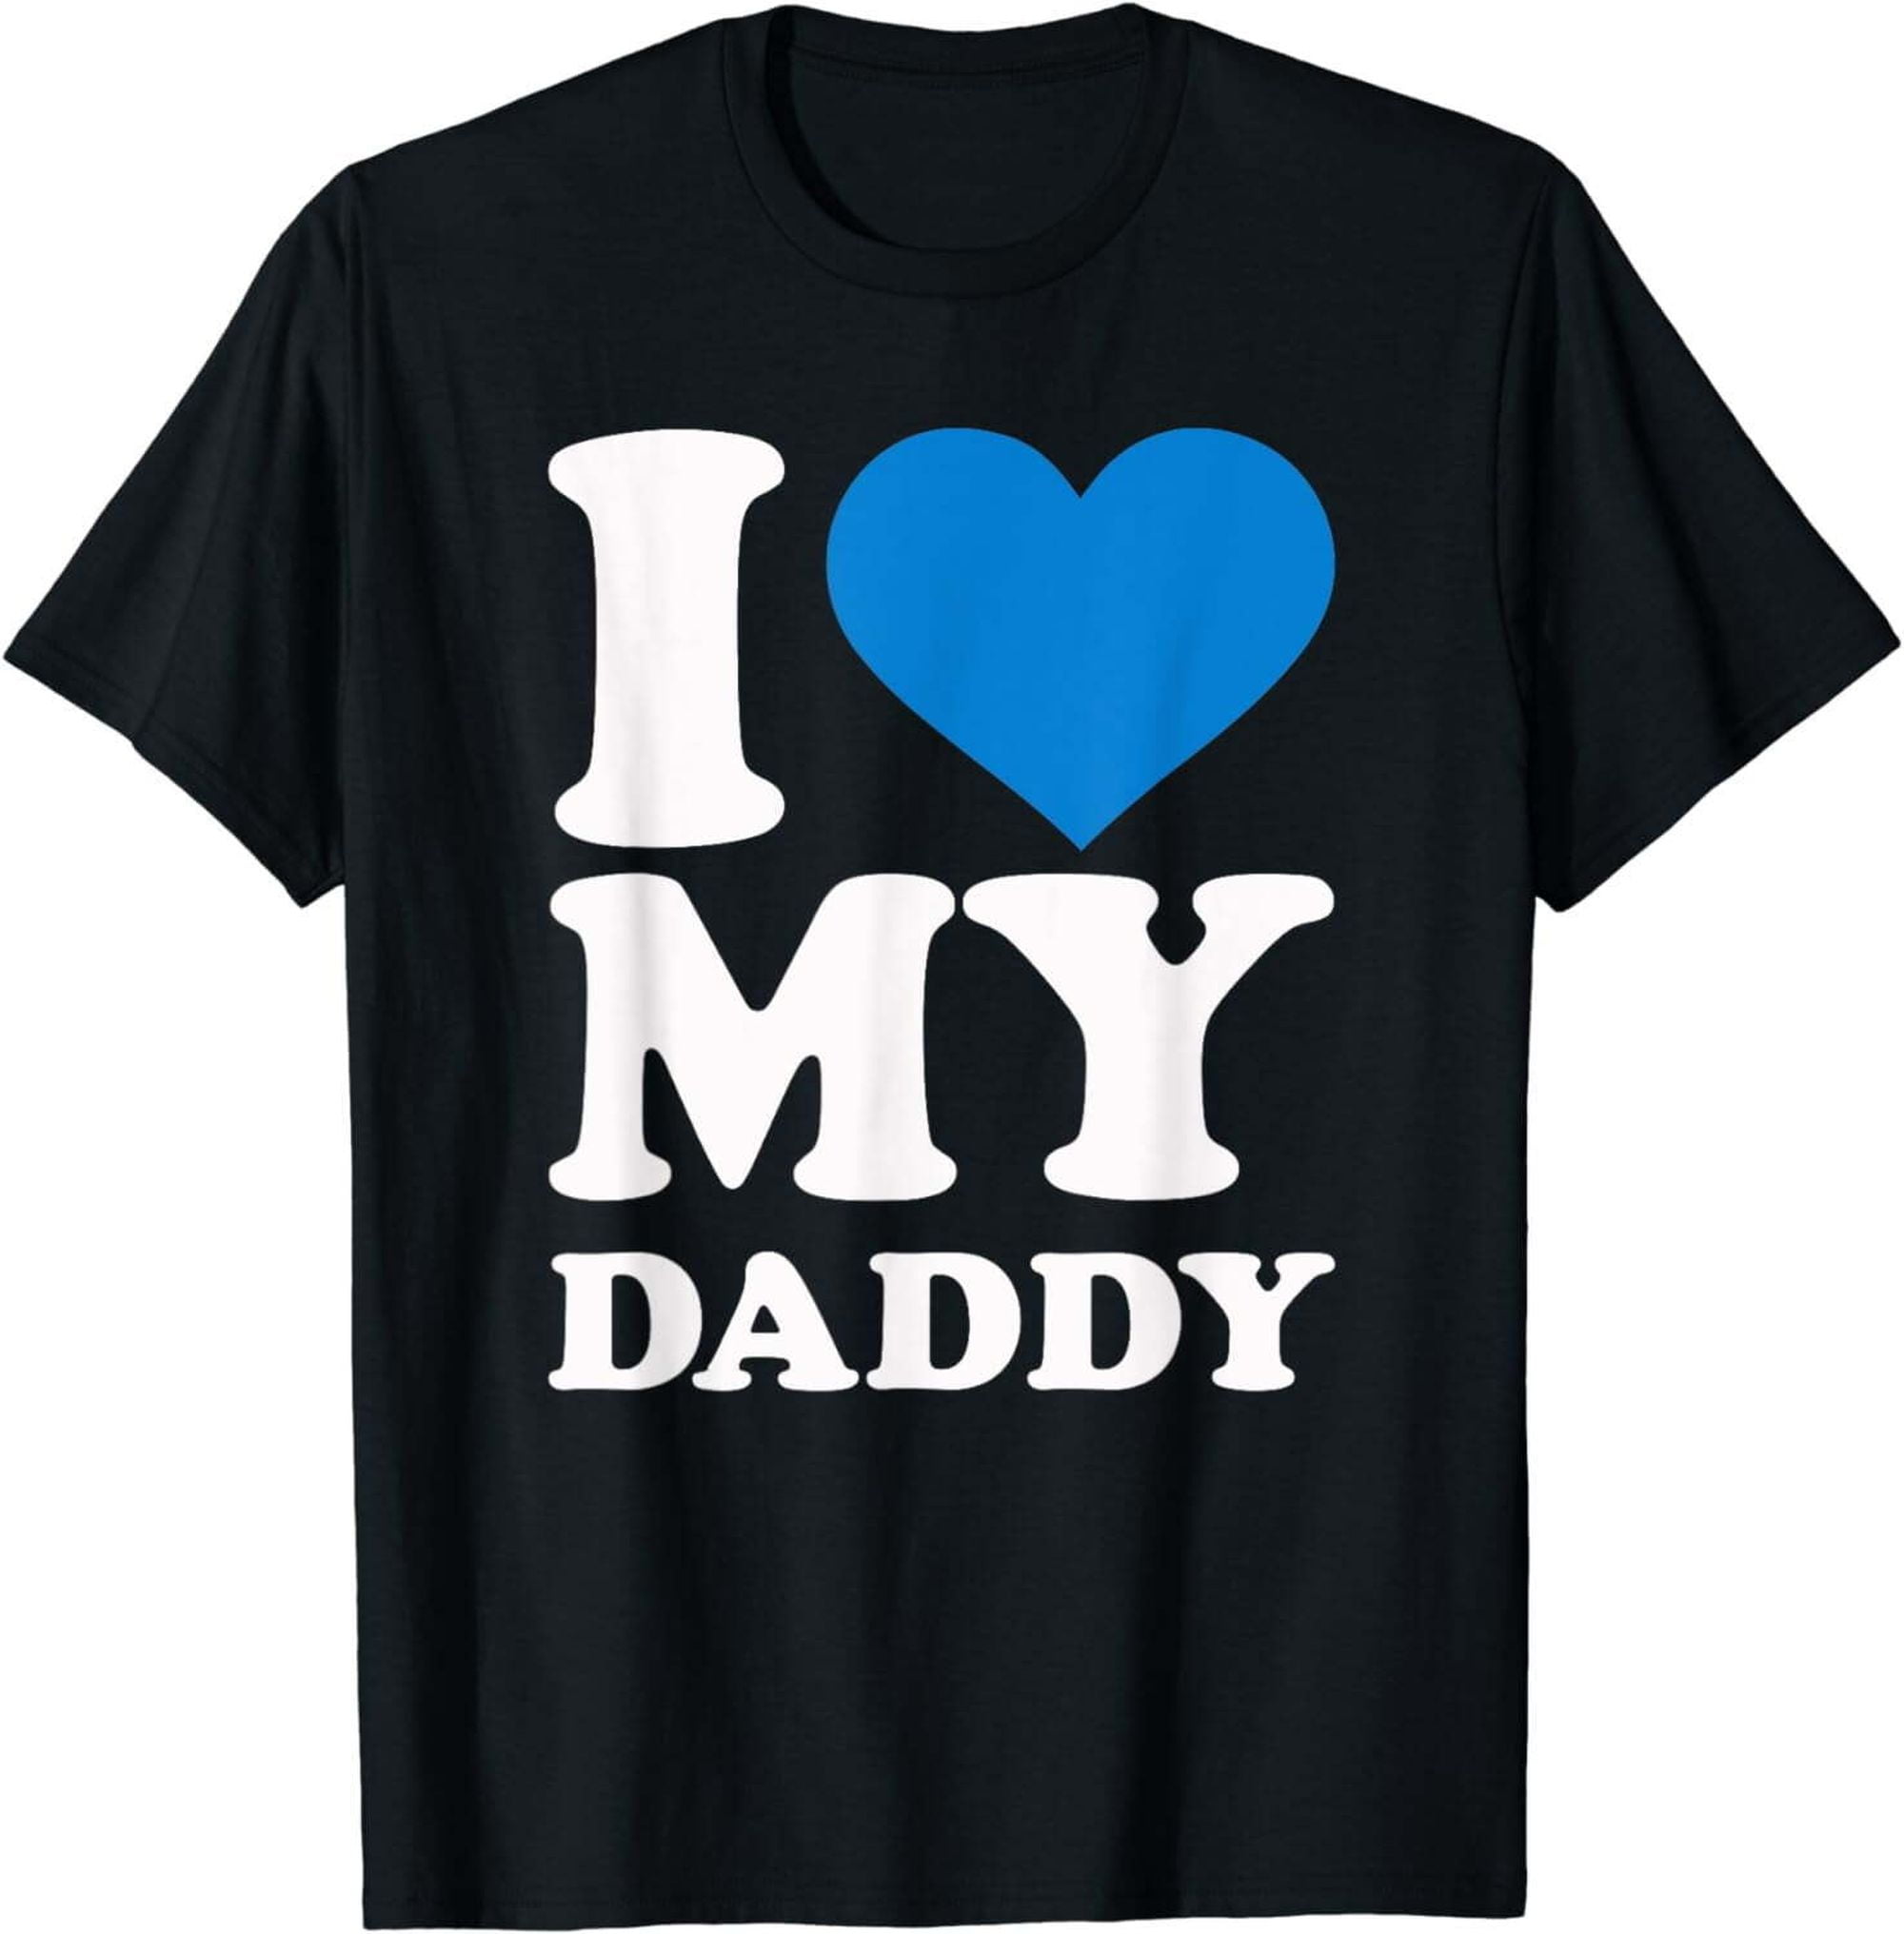 Best Dad Ever T-Shirt - Express Your Love for Father! - Walmart.com